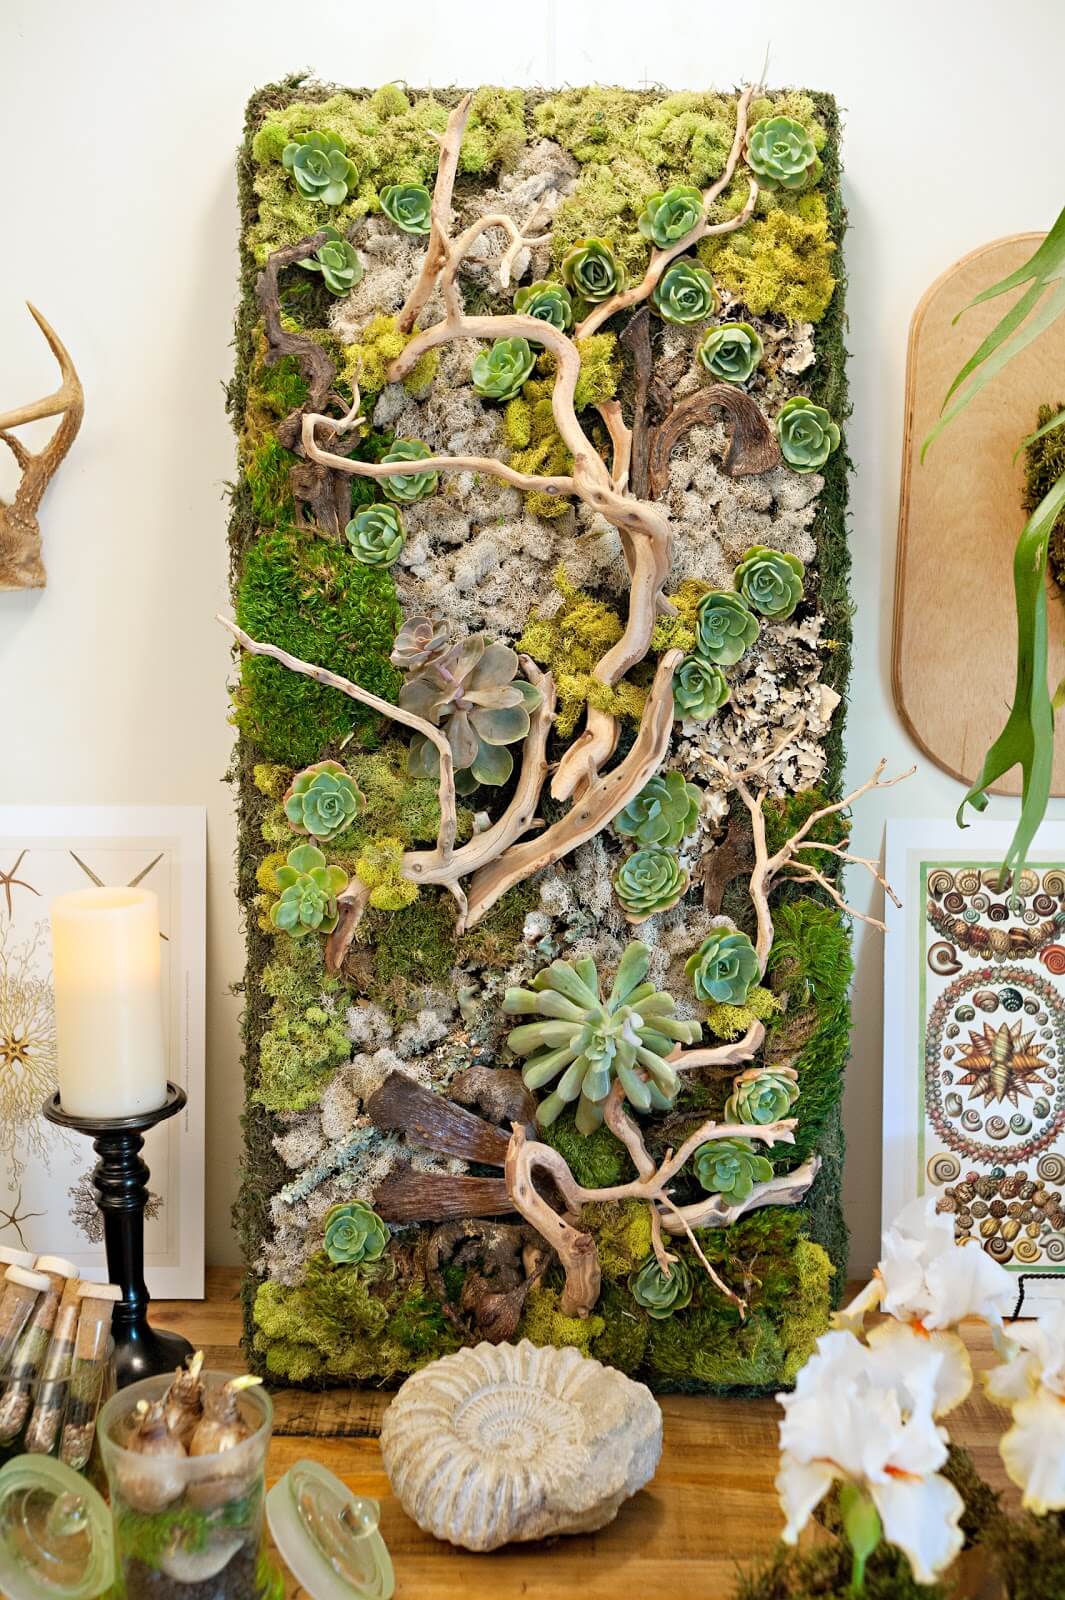 Embellished Wall Panel Showcases Succulents and Driftwood